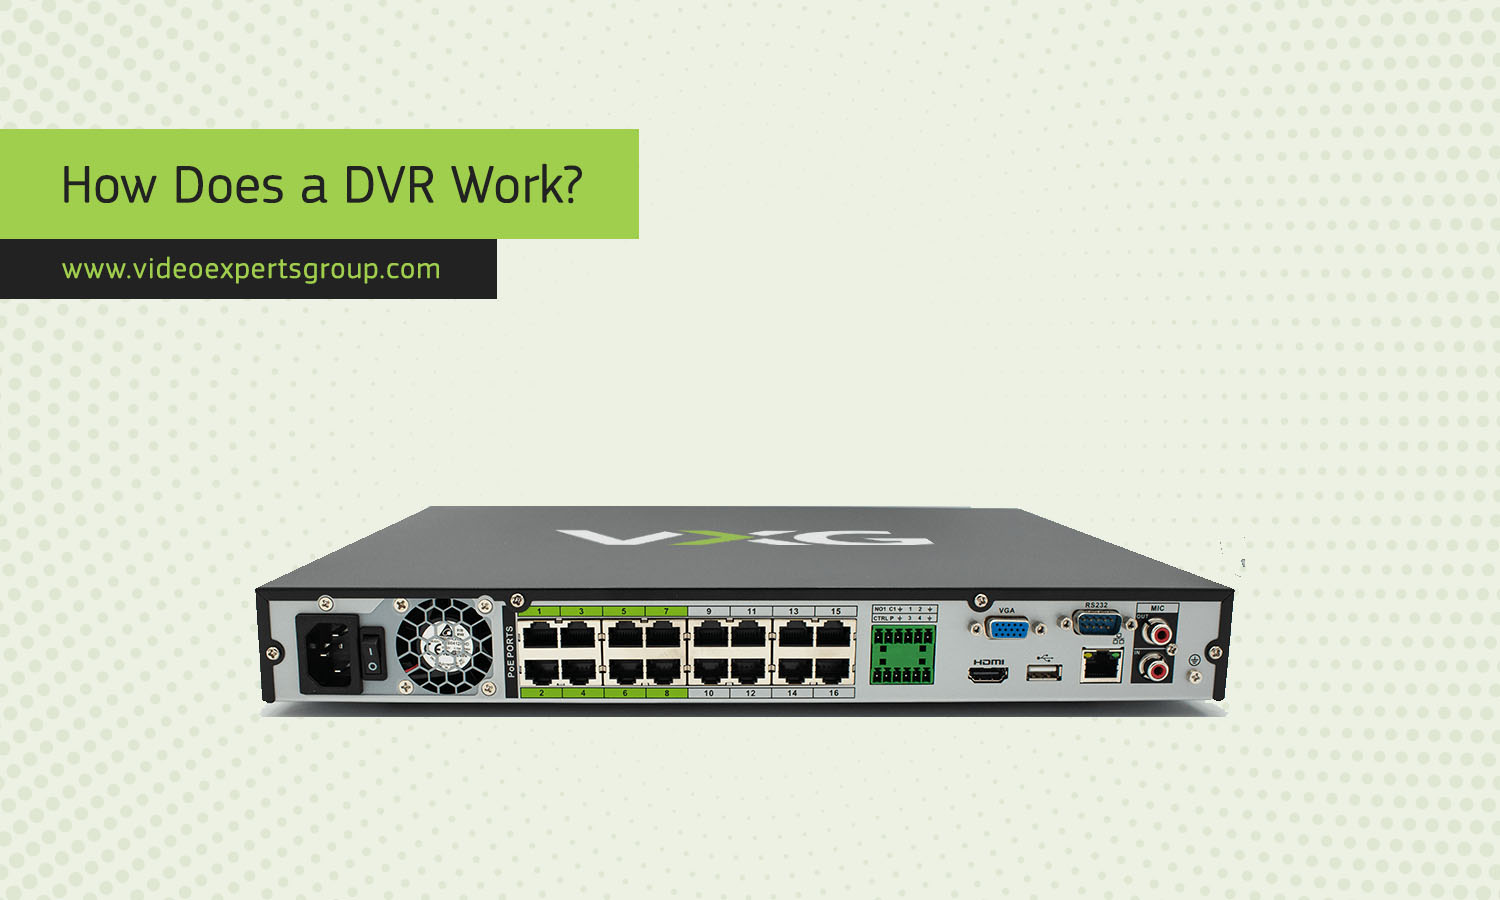 How Does a DVR Work?